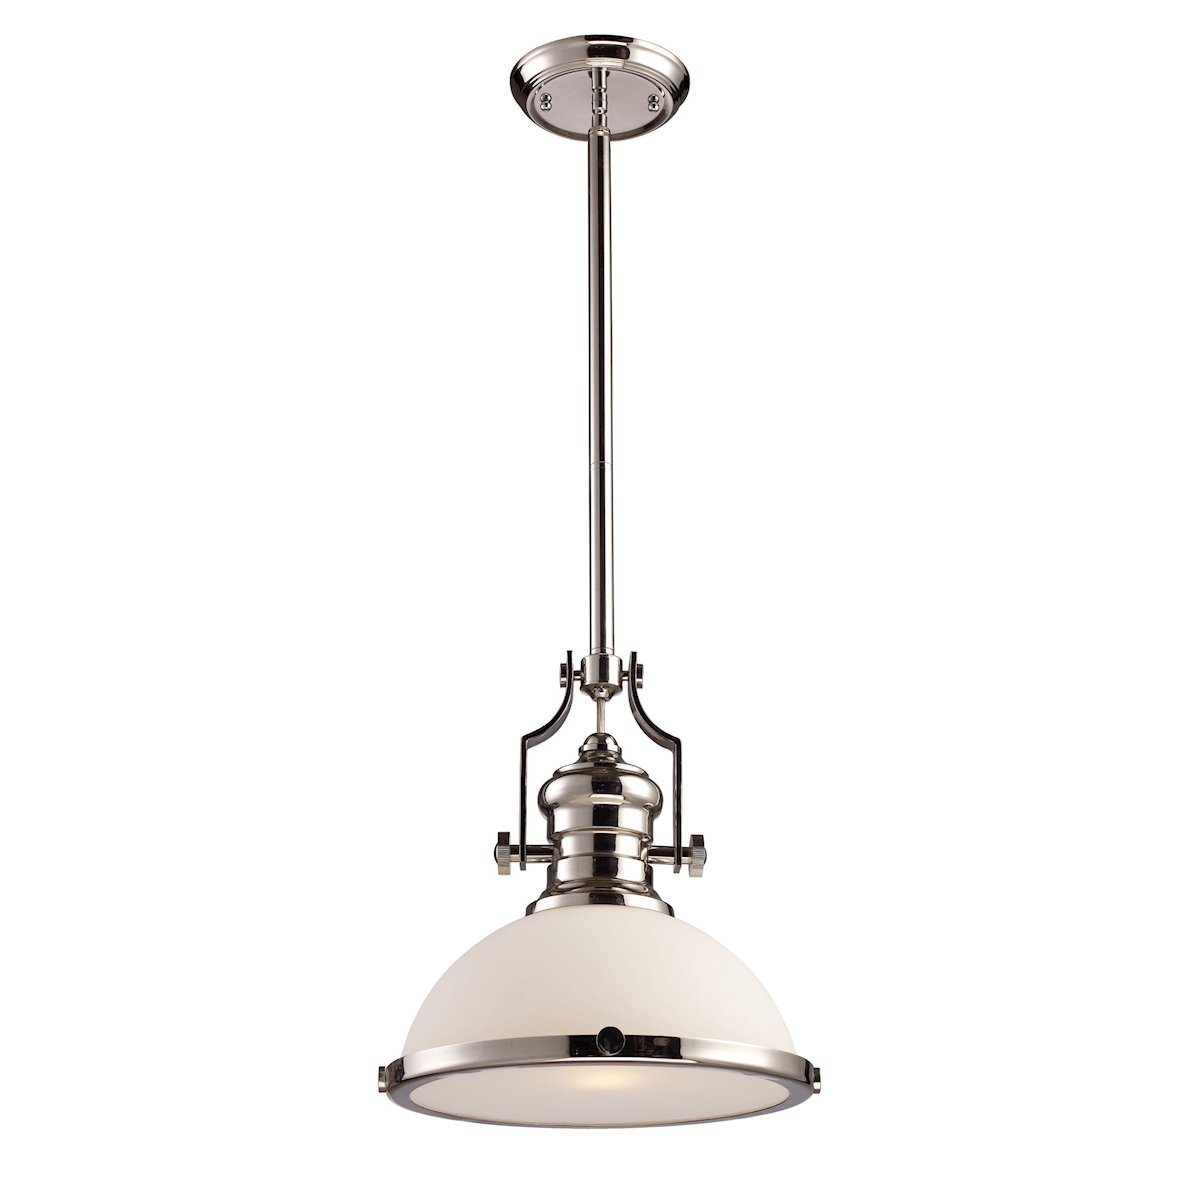 Chadwick 1 Light Pendant In Polished Nickel With White Glass Ceiling Elk Lighting 